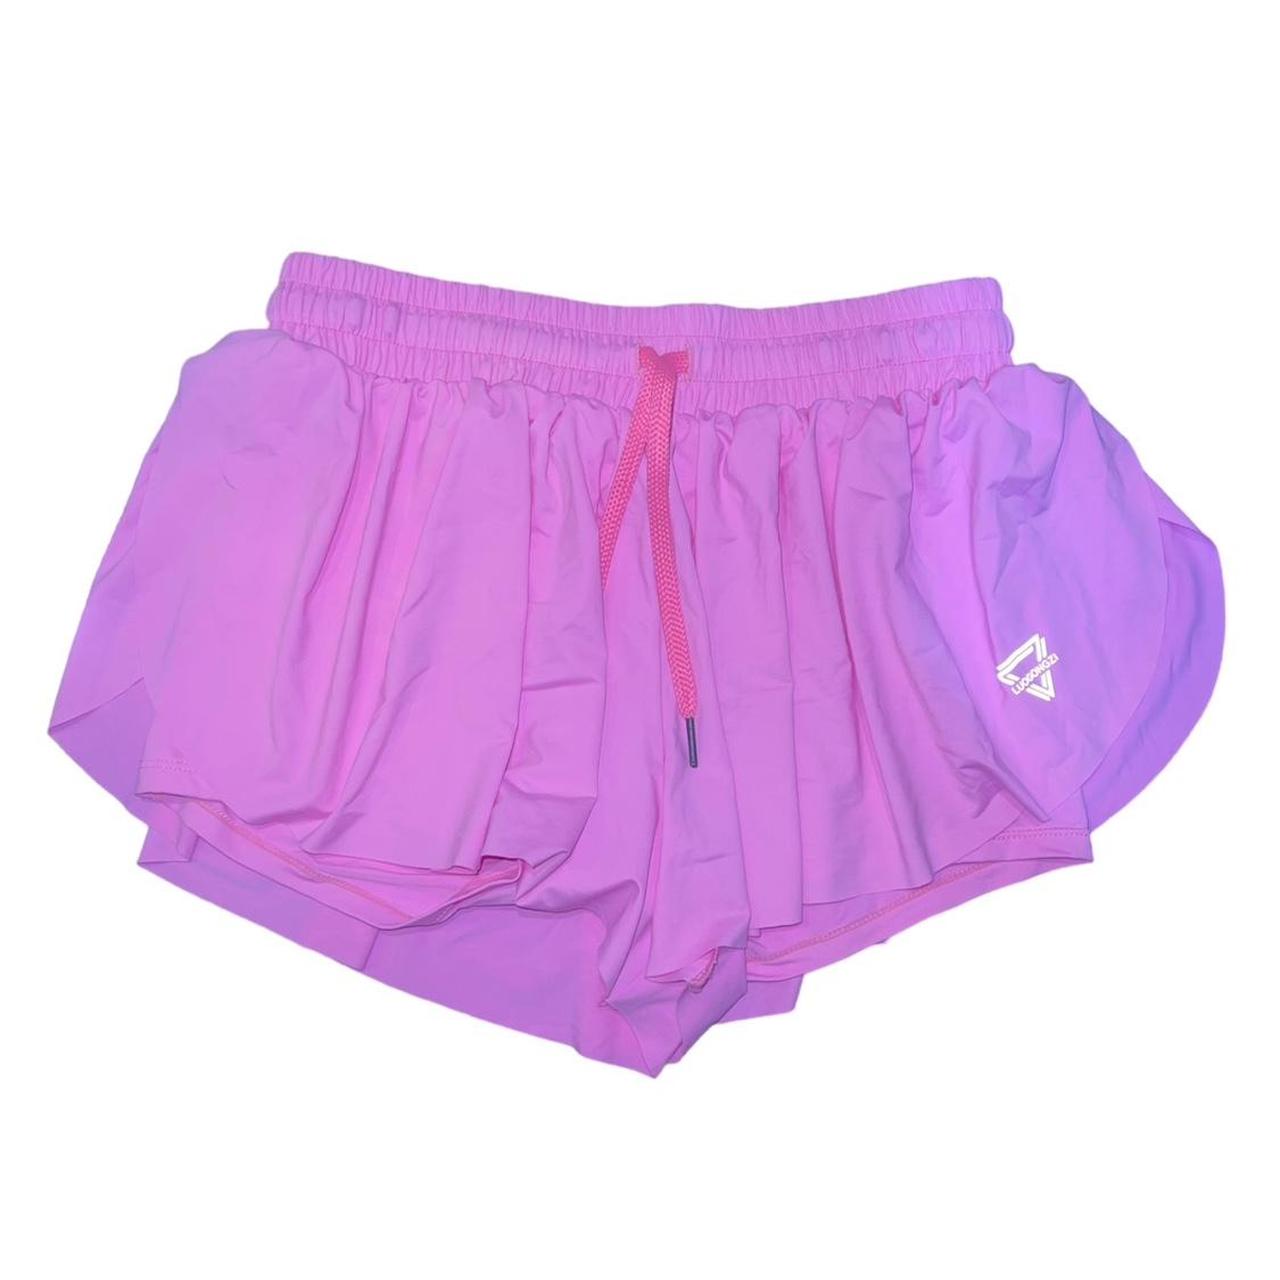 Luogongzi Flowy Athletic Shorts Are Great for Any Type of Workout